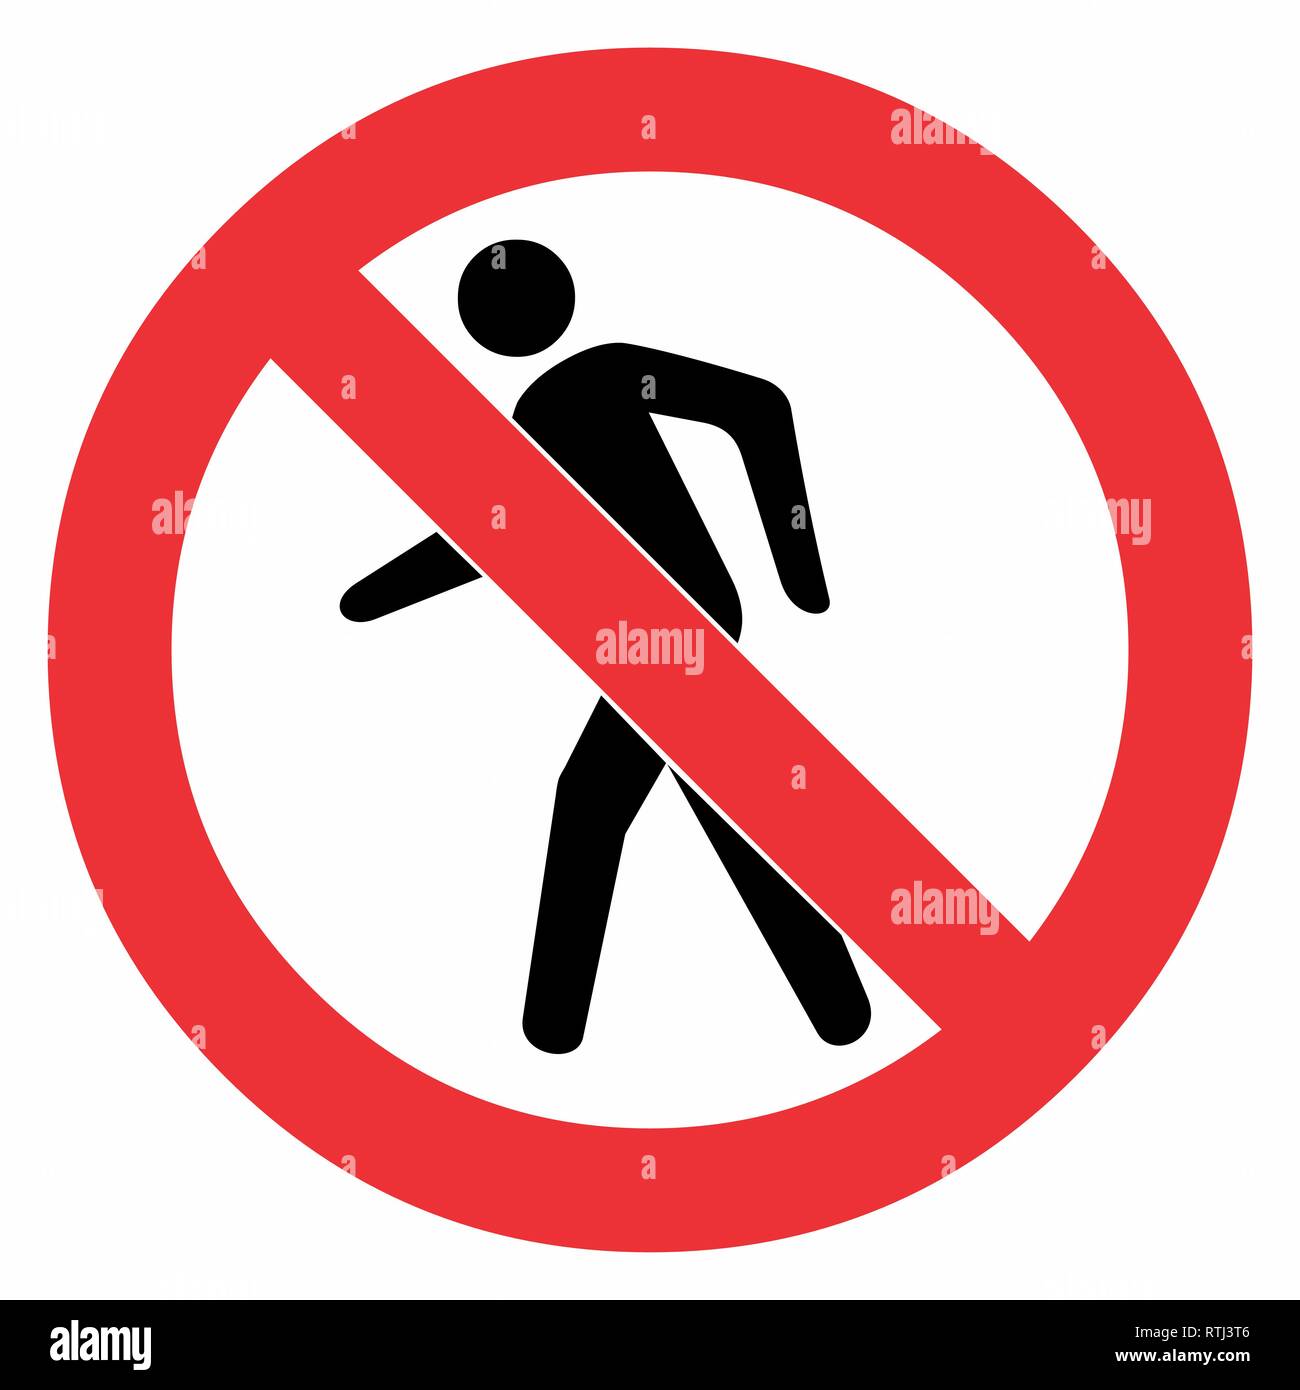 Pedestrian crossing traffic sign Stock Vector Images - Alamy